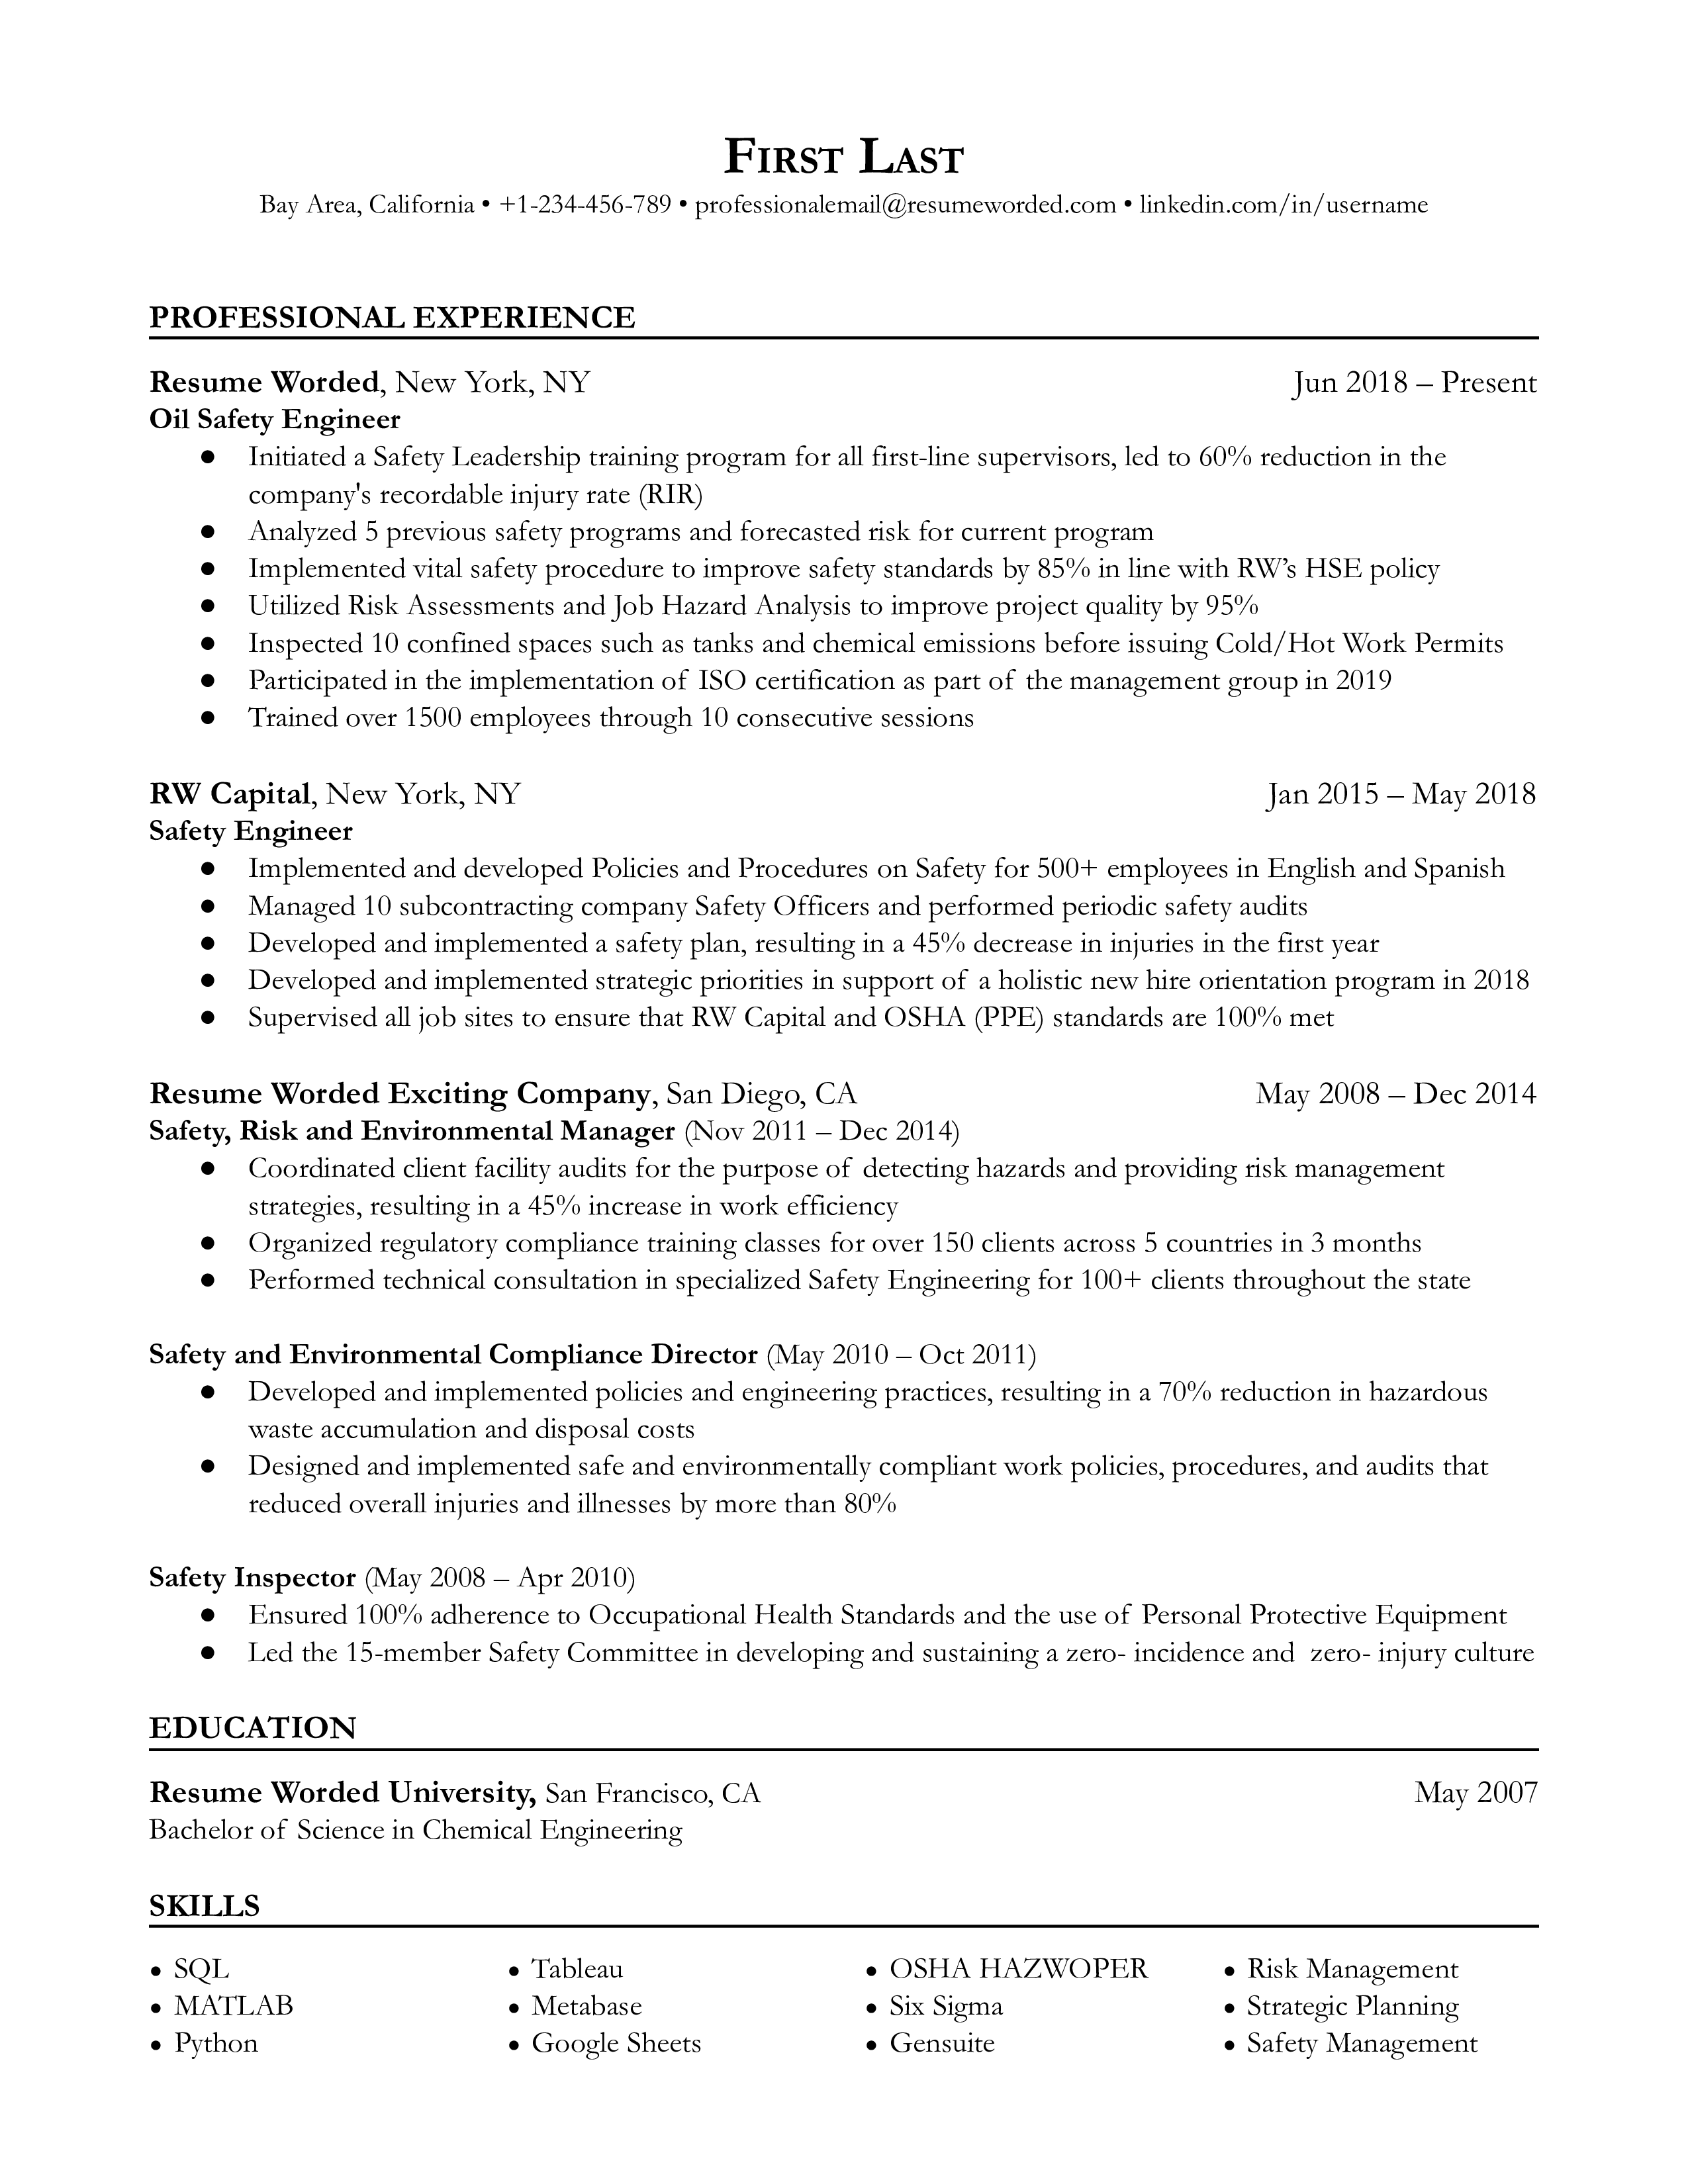 Professional CV of an Oil Safety Engineer highlighting relevant industry certifications and safety inspection experiences.